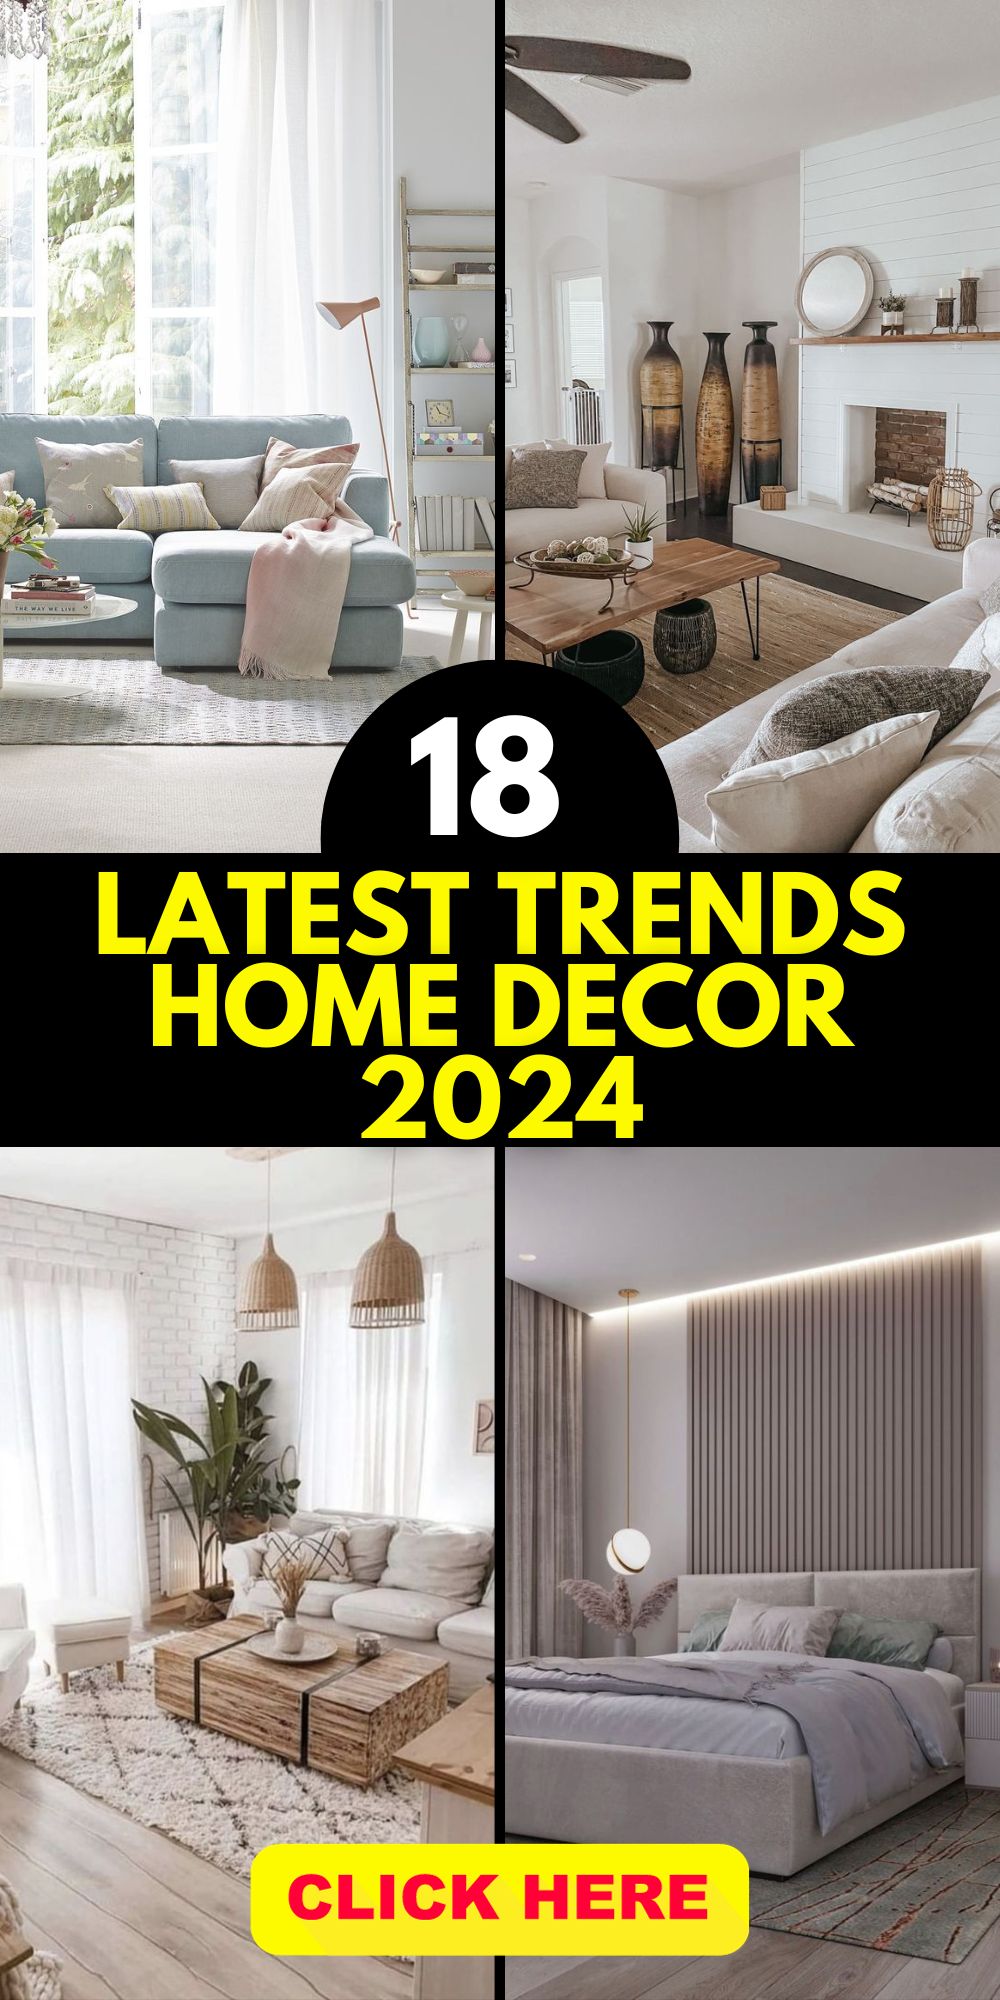 18 Ideas Latest Home Decor Trends 2024 Insights From A US Interior